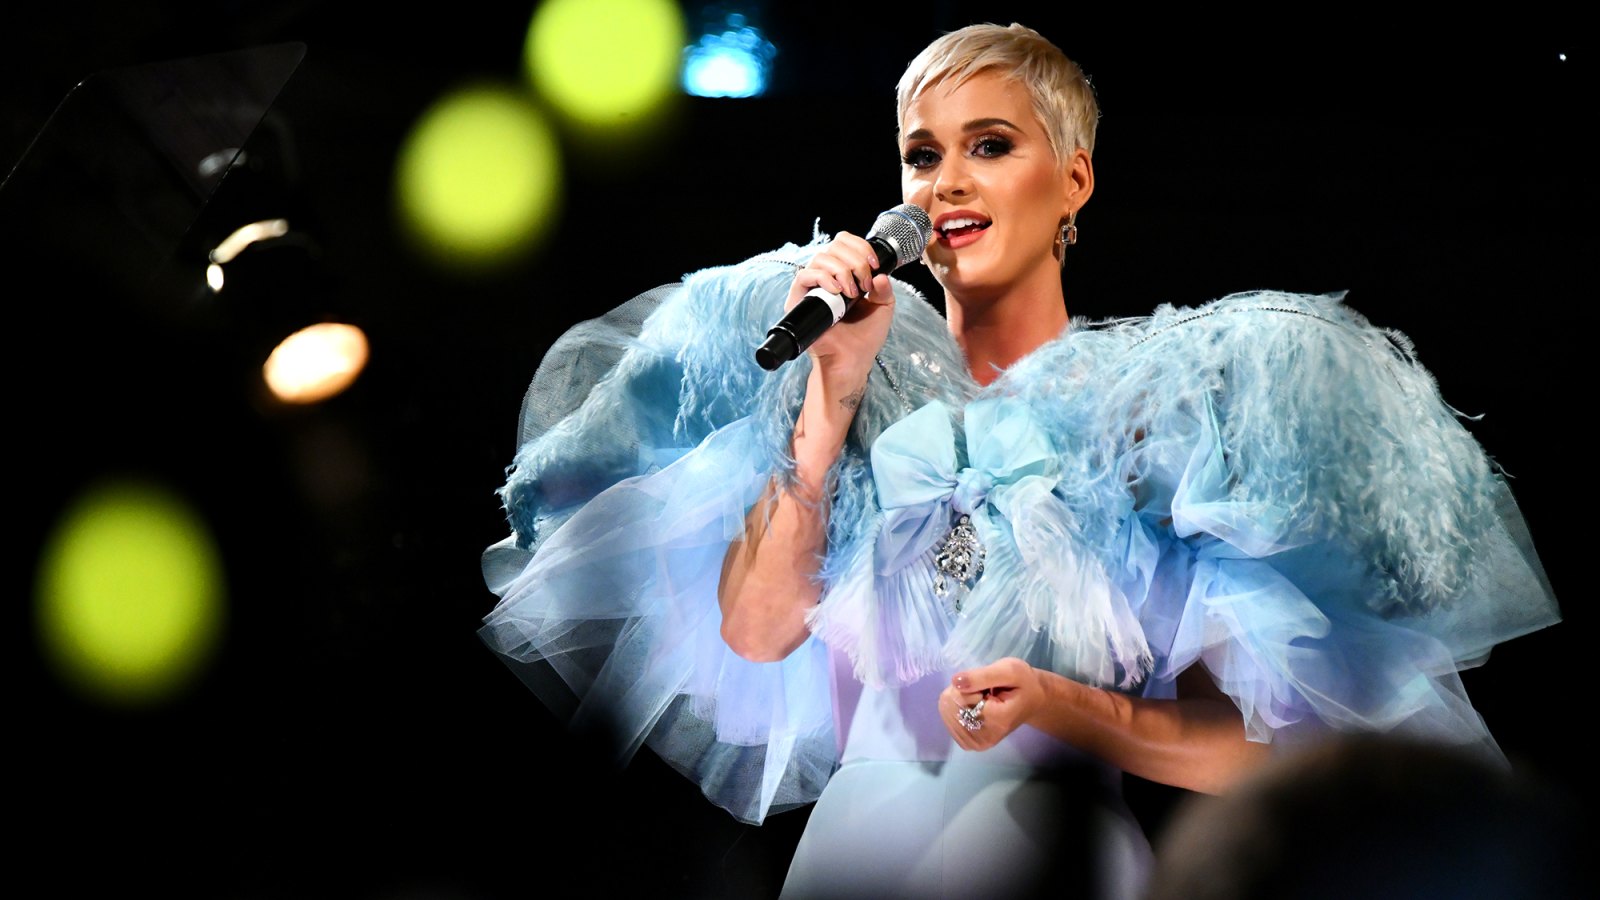 Katy Perry performs onstage at the amfAR Gala Los Angeles 2018